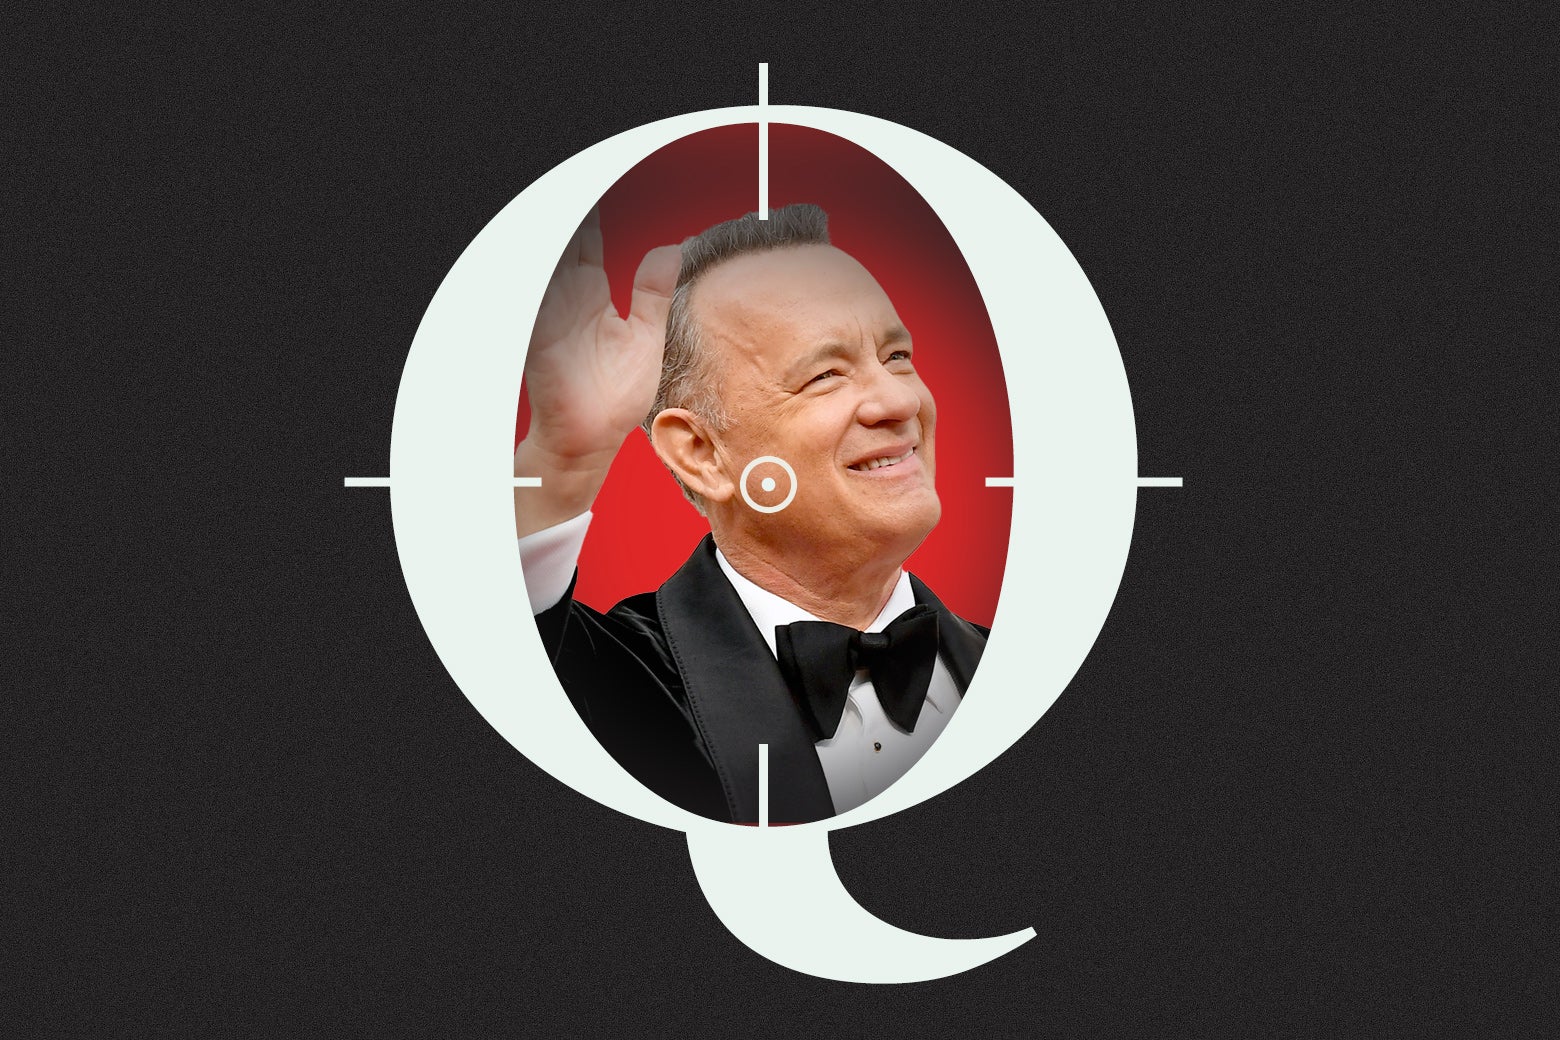 Tom Hanks in a bow tie with a Q and a target over his face.